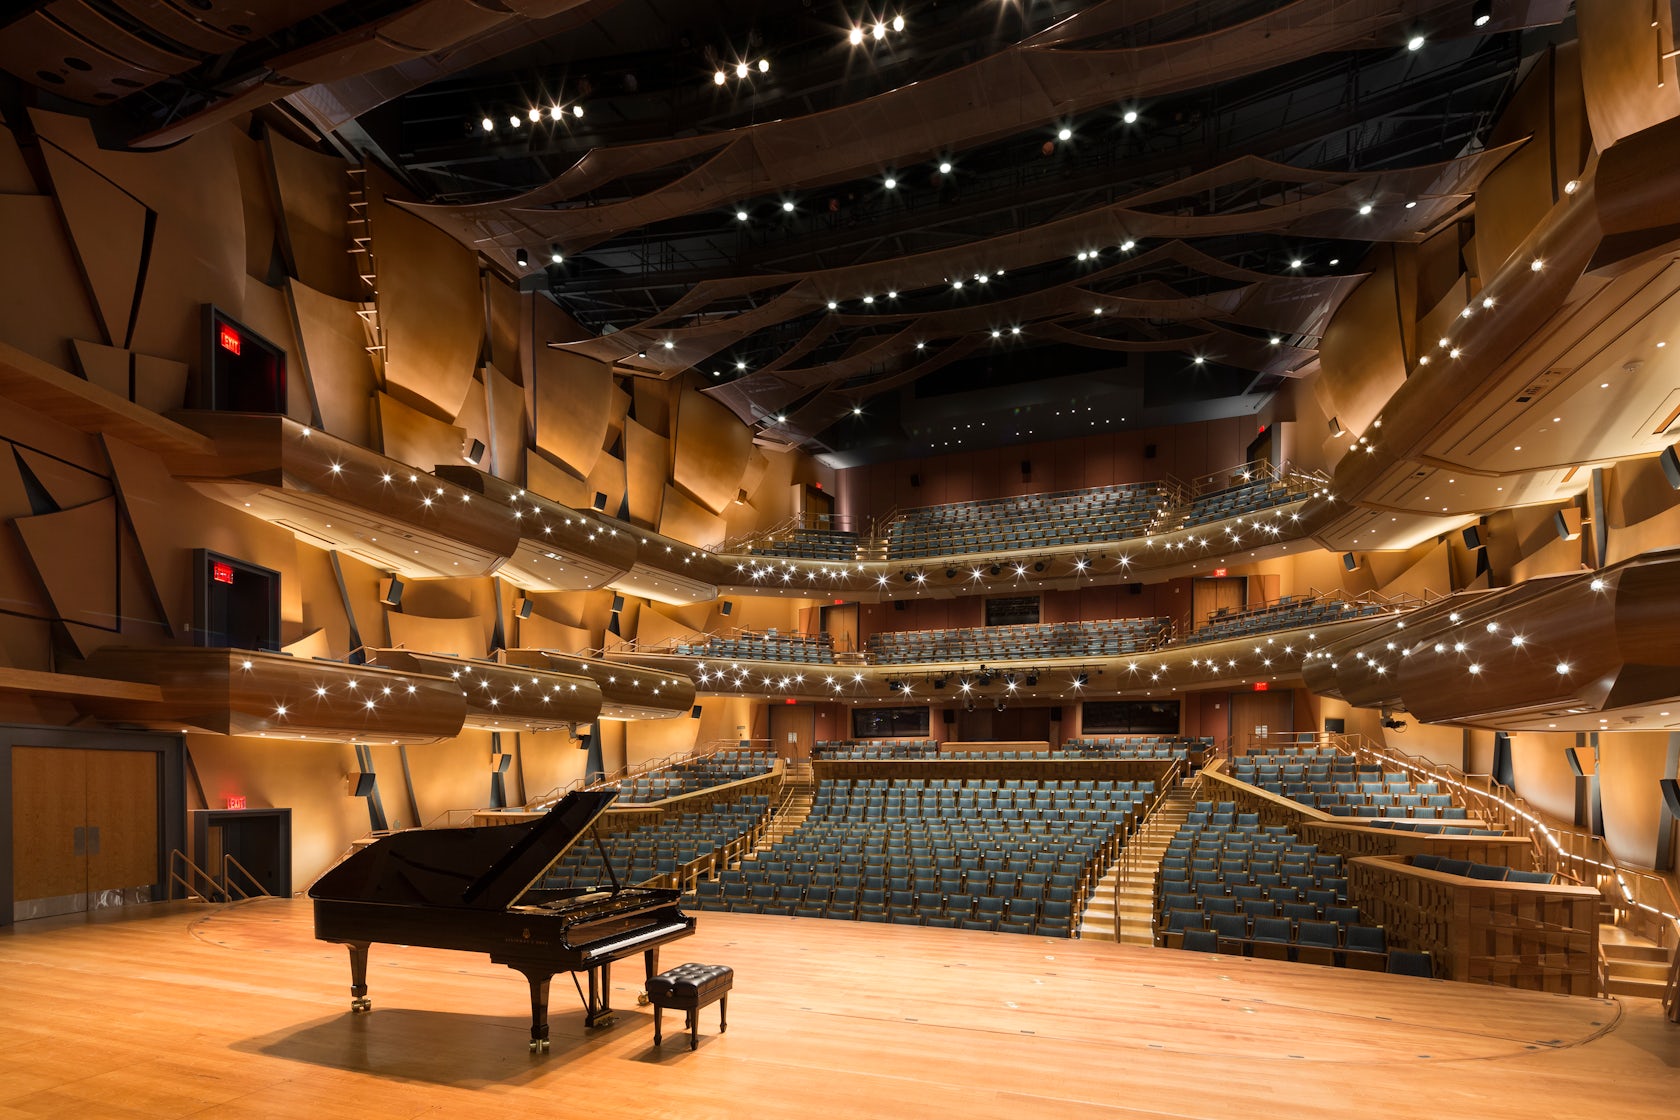 Chapman University Musco Center for the Arts by Pfeiffer, a Perkins